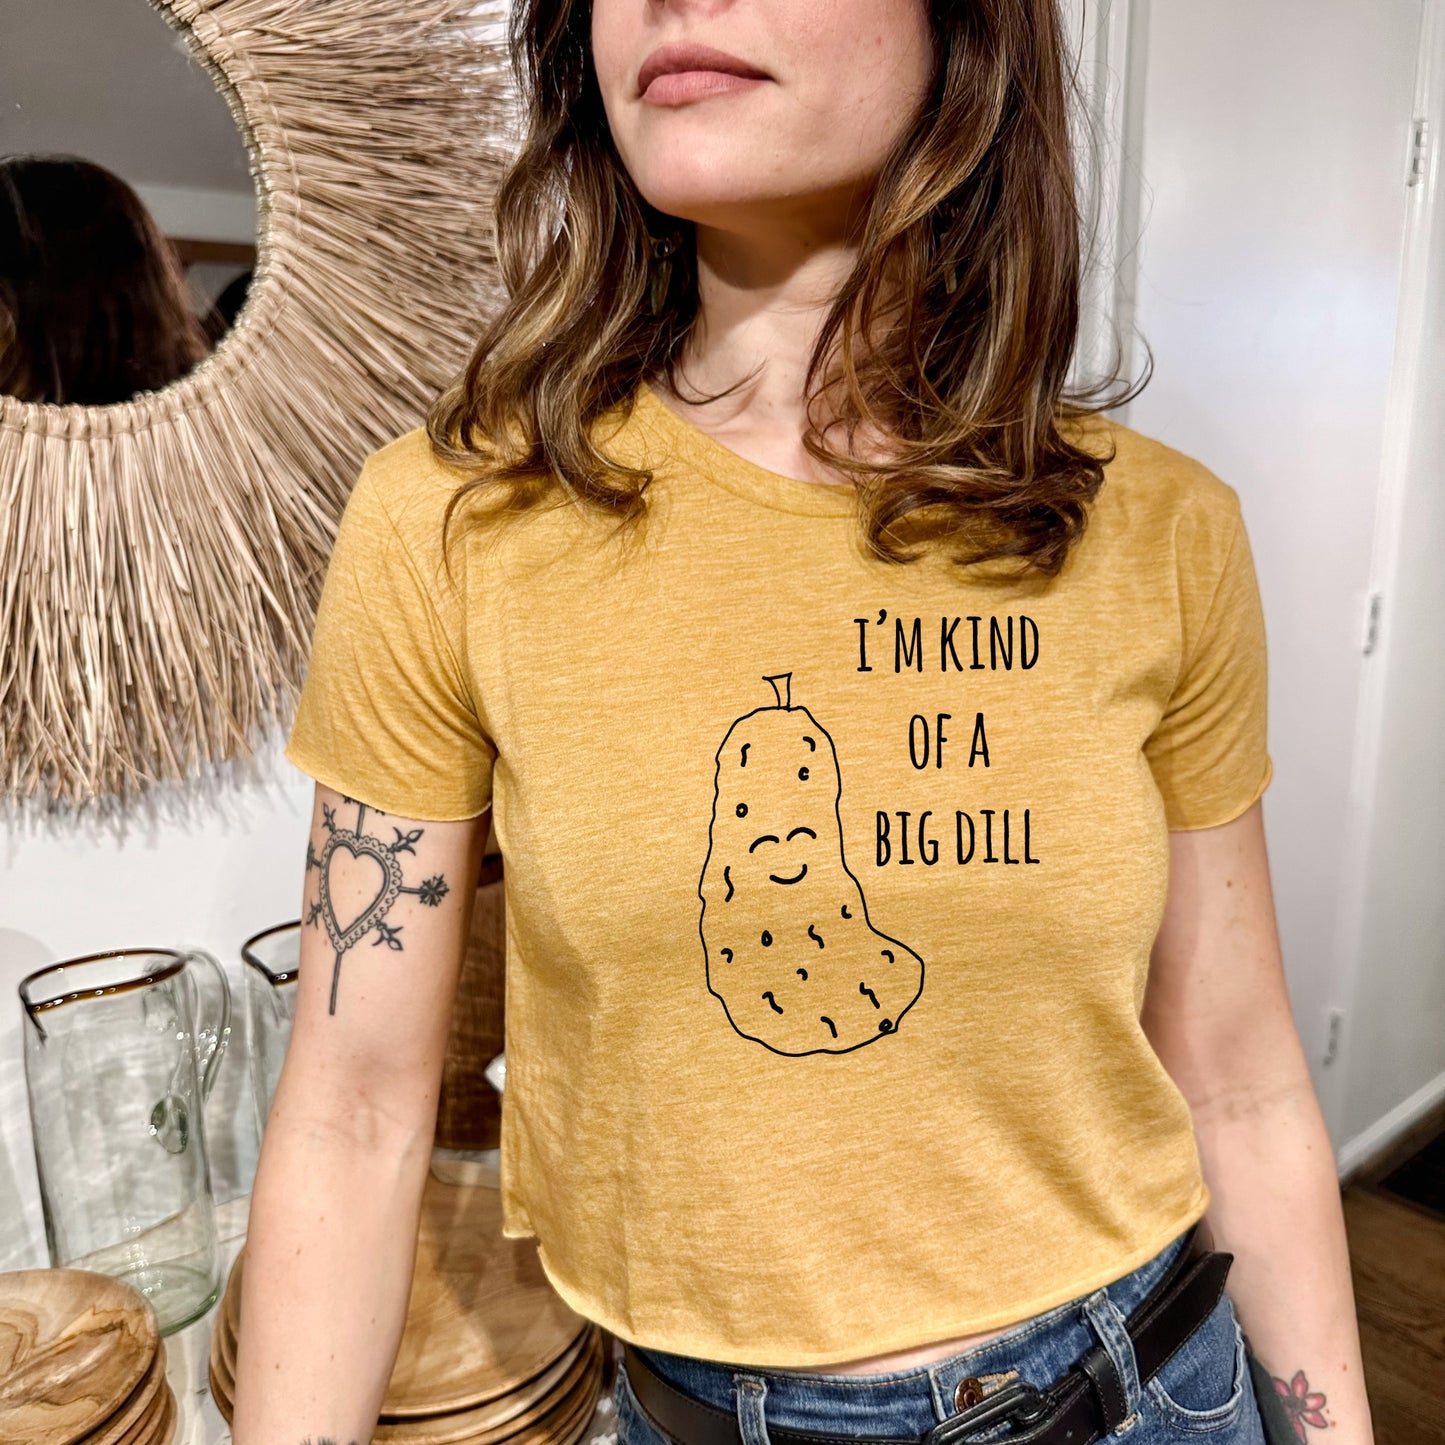 I'm Kind Of A Big Dill (Pickle) - Women's Crop Tee - Heather Gray or Gold